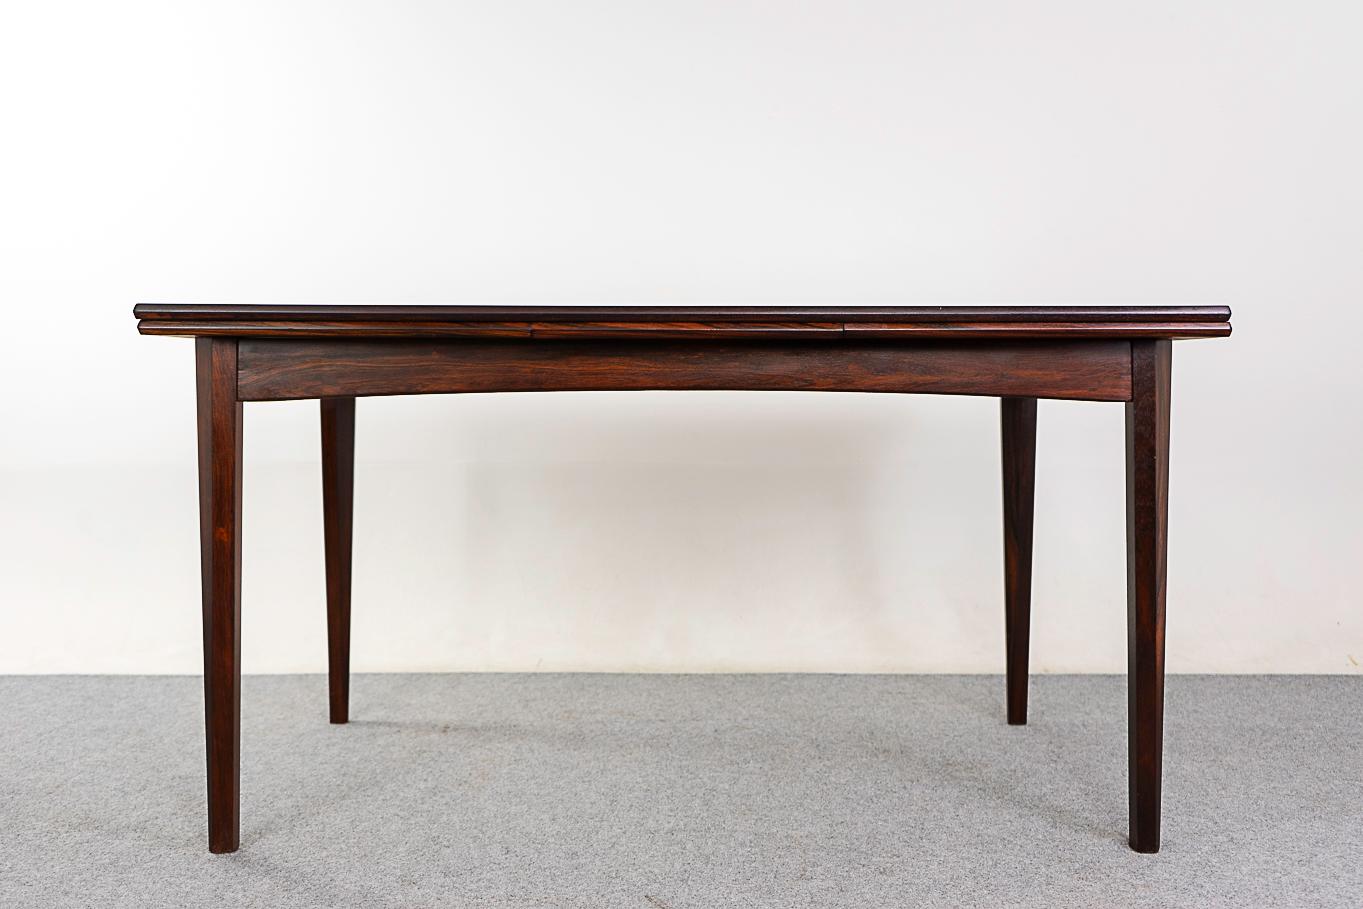 Rosewood Danish dining table, circa 1960's. Top is framed in solid wood, center panels feature highly figured veneer with book-matched grain. Sultry sculptural legs and arched apron. Self-storing leaves slide out from each end to extend the table